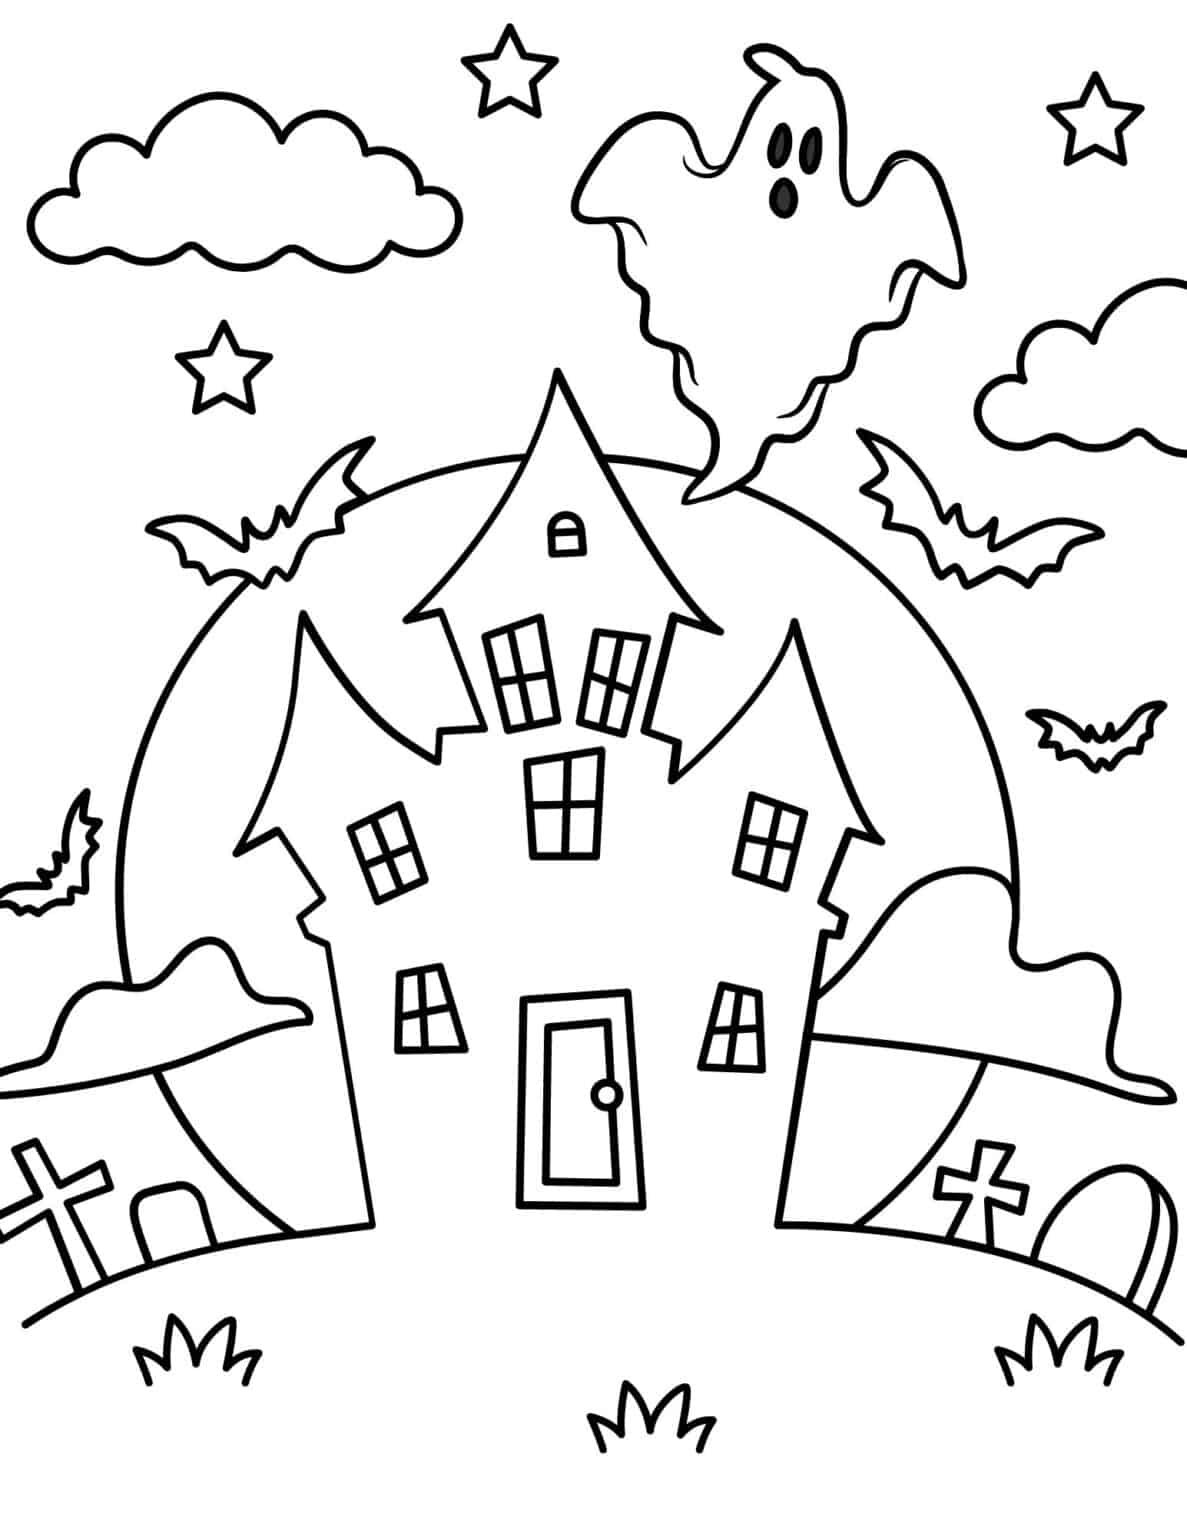 Free Printable Haunted House Coloring Pages - Prudent Penny Pincher